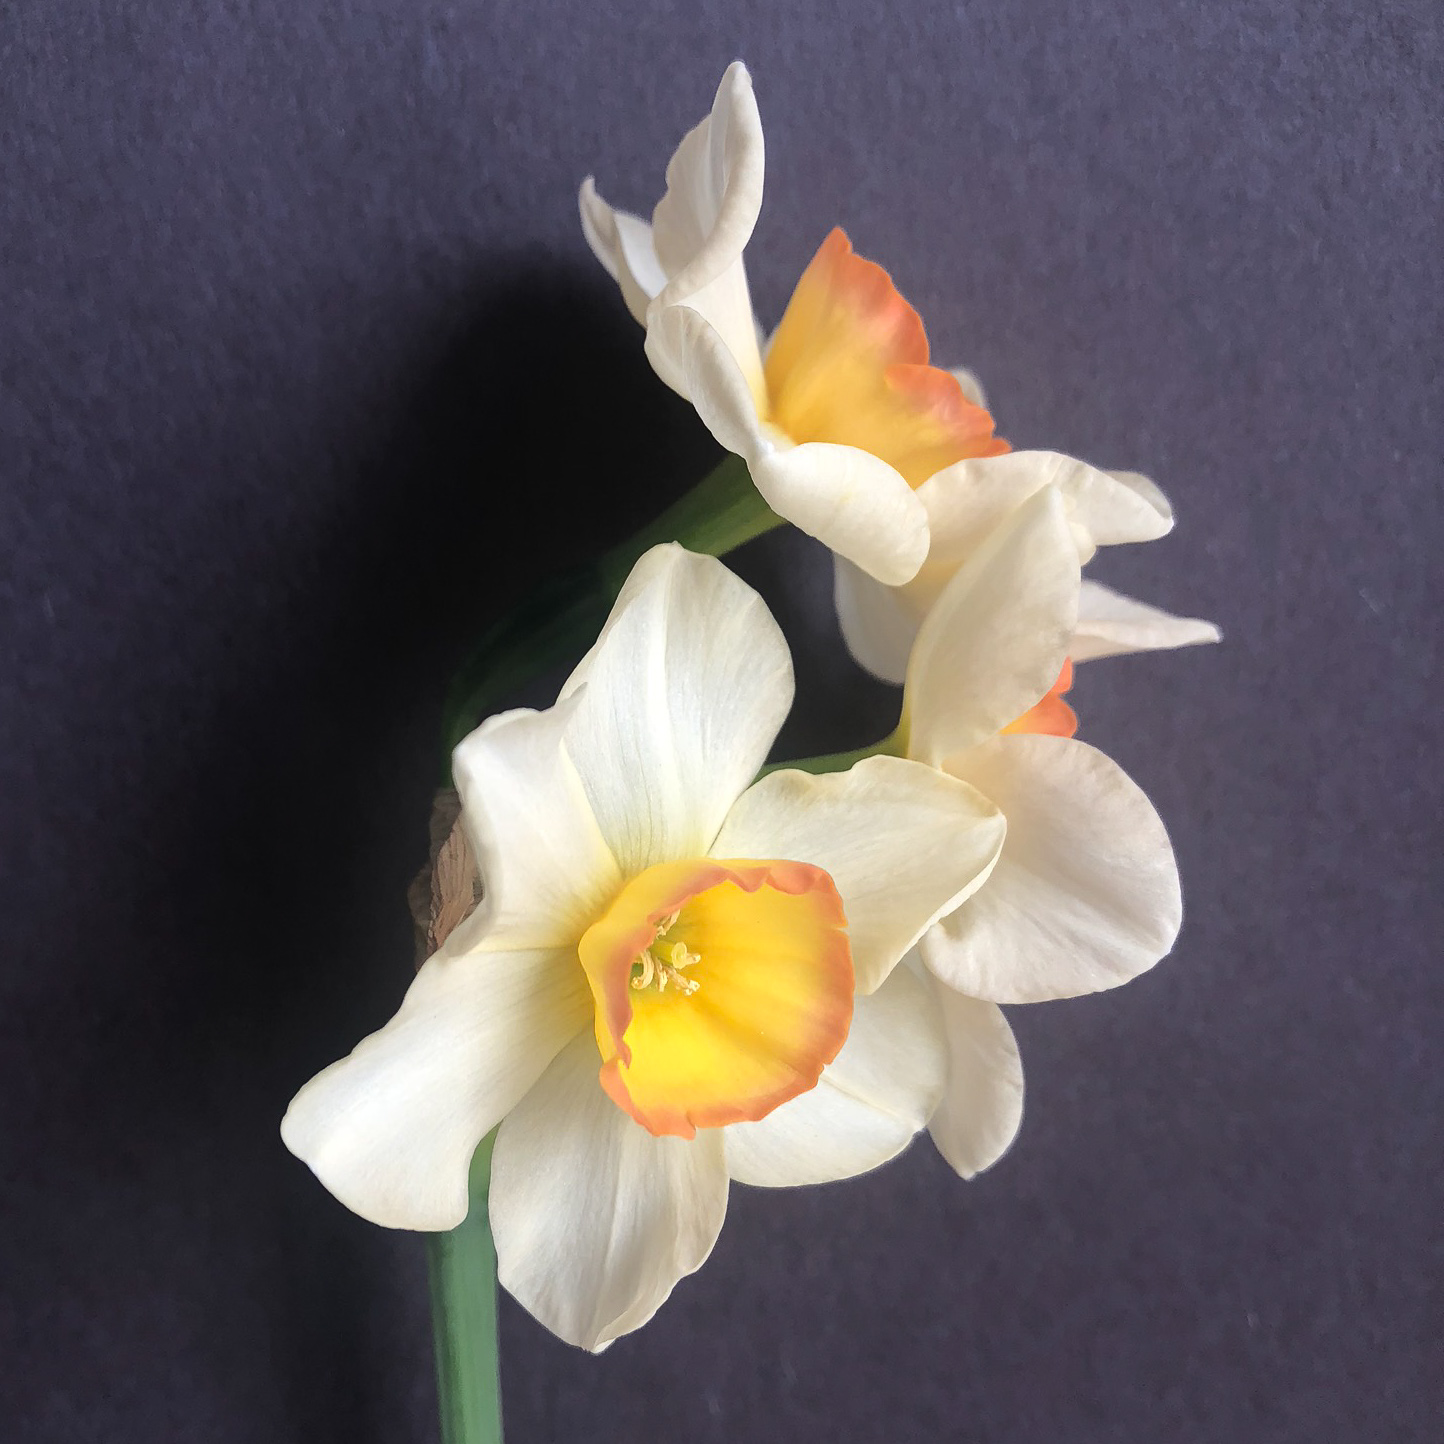 three narcissus yazz flowers on a single stem all facing different angles